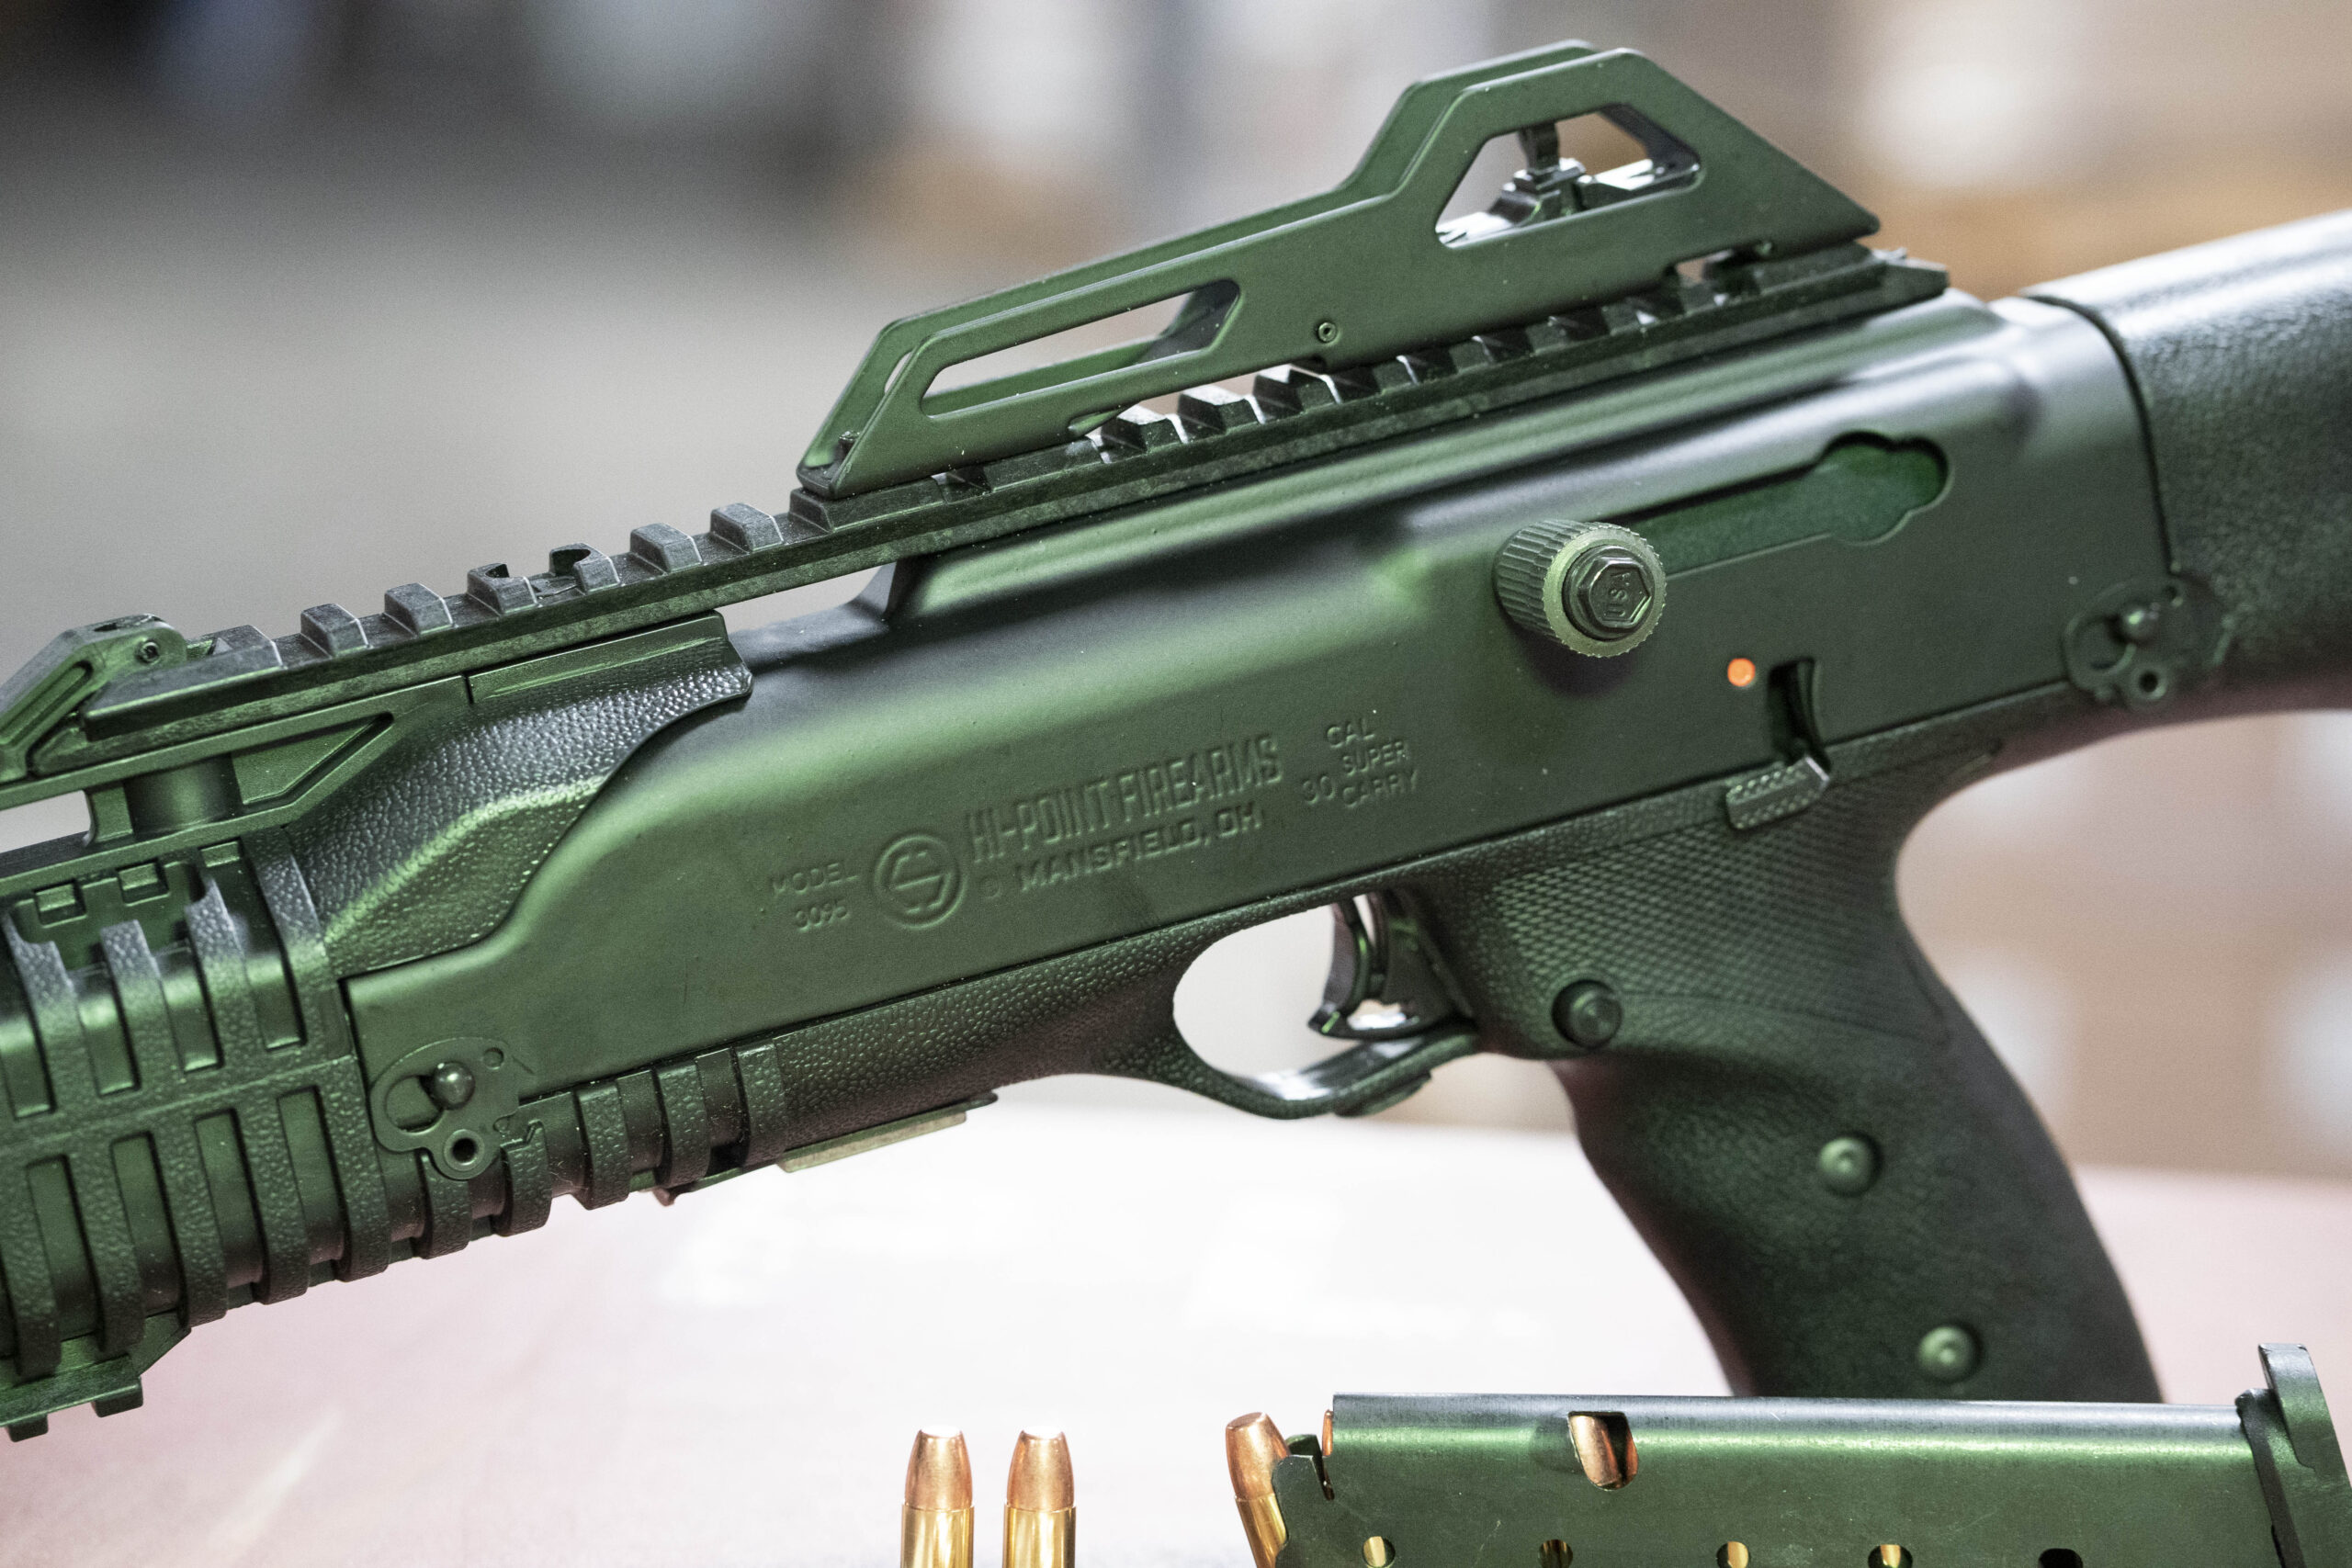 30 Super Carry Comes to Hi-Point - The Model 995 Super Carry Carbine